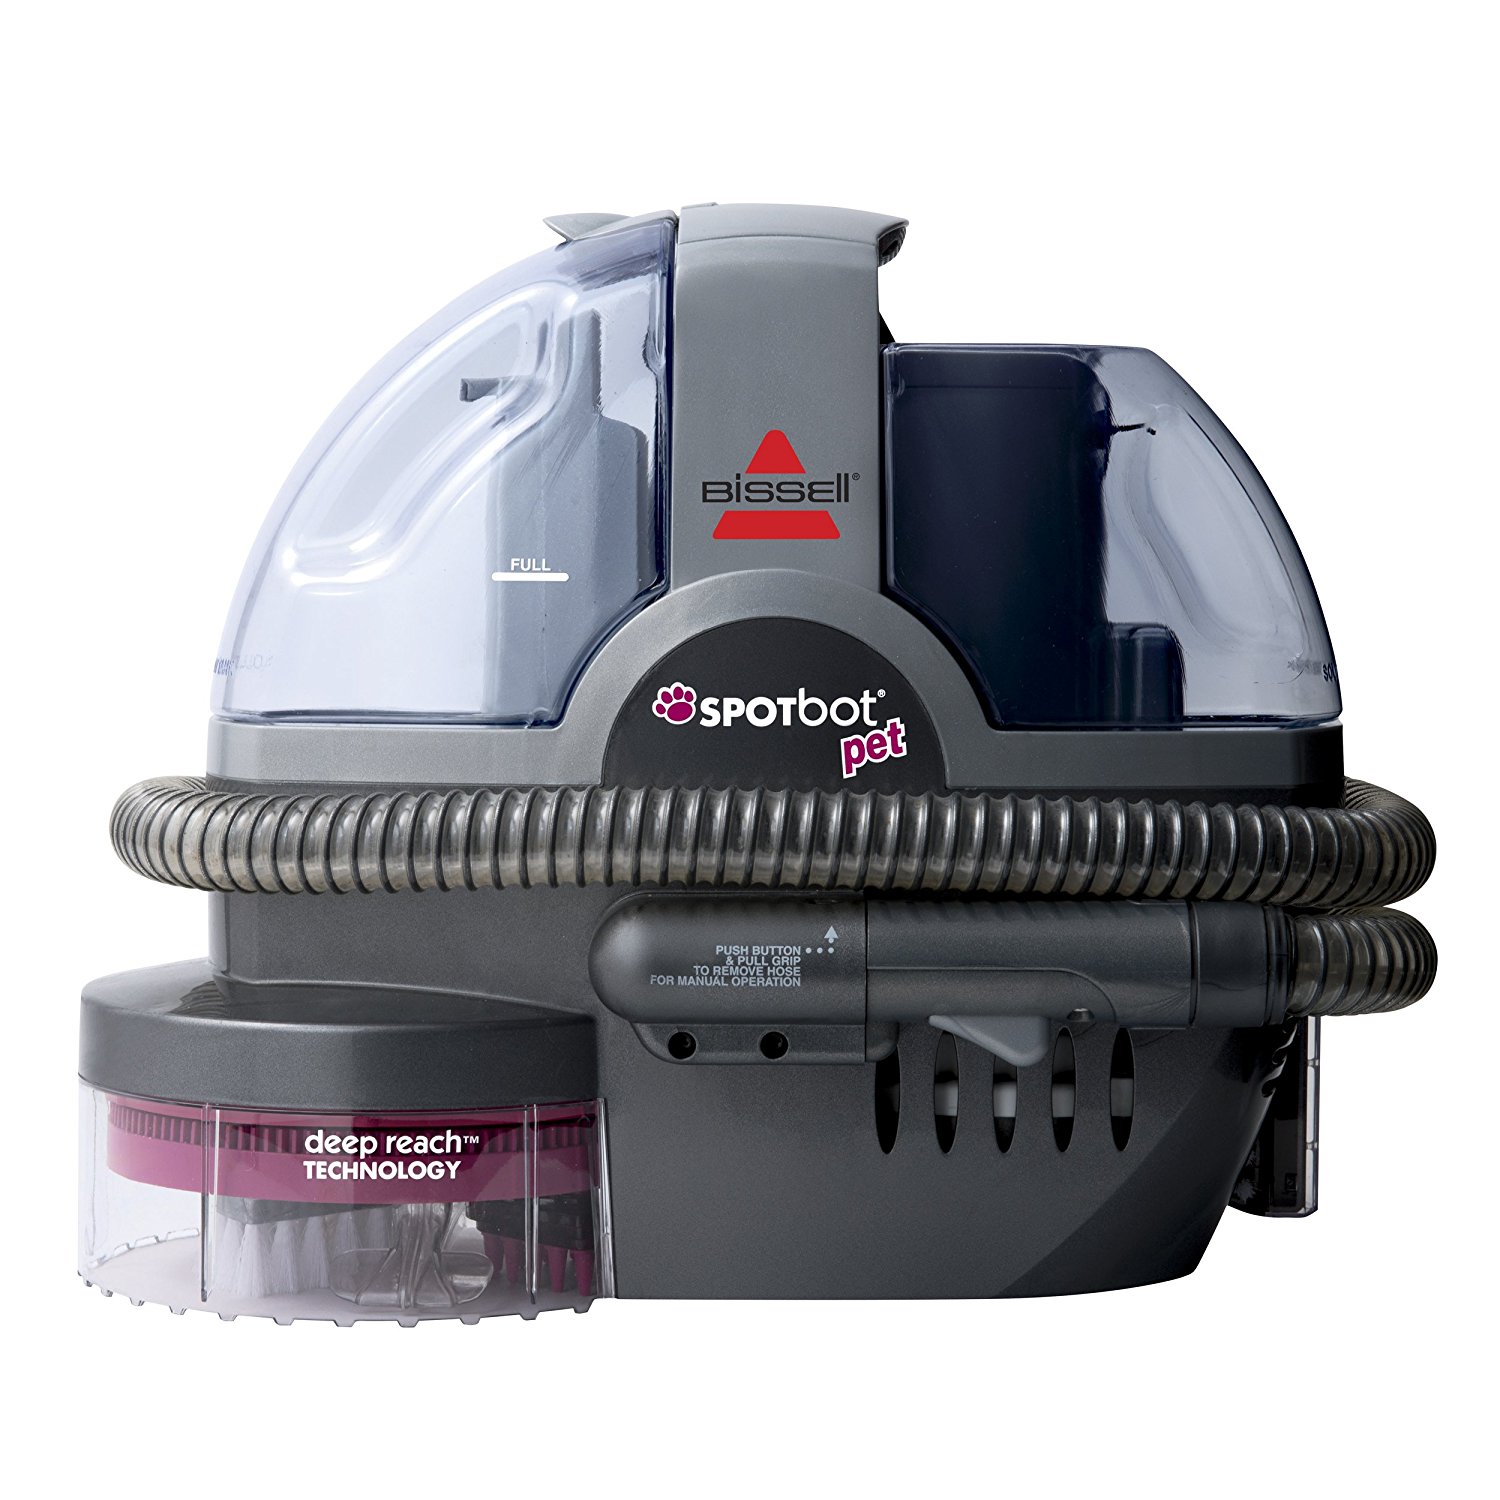 Bissell SpotBot Pet handsfree Spot And Stain Cleaner